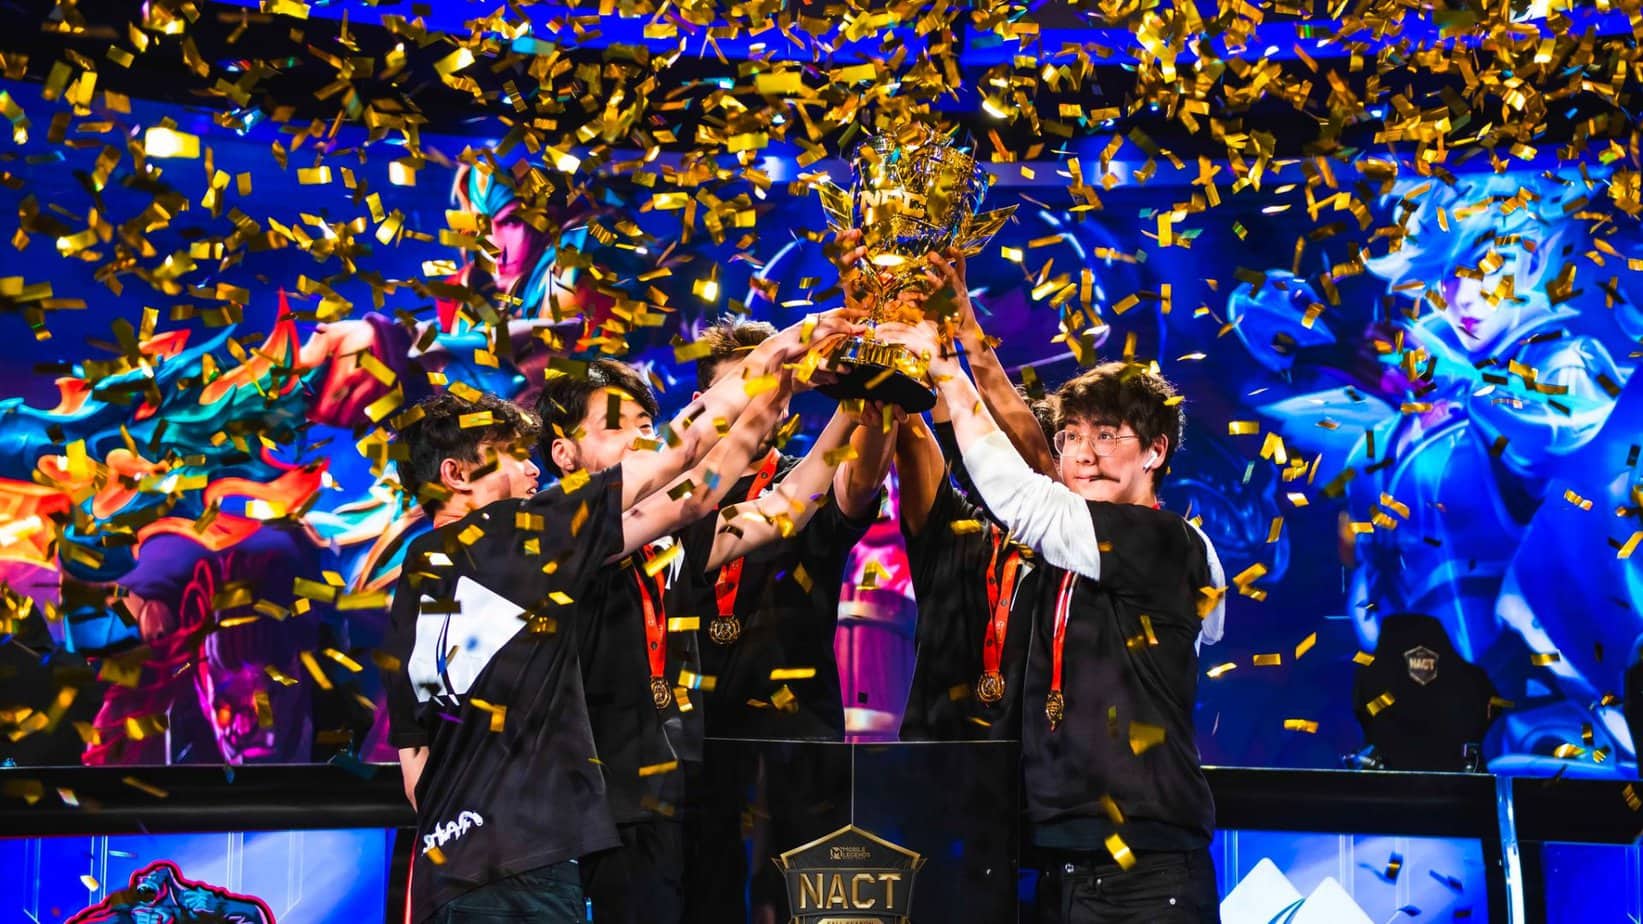 Big stakes for NACT Spring 2023 — winner will now qualify for two international tournaments - ONE Esports